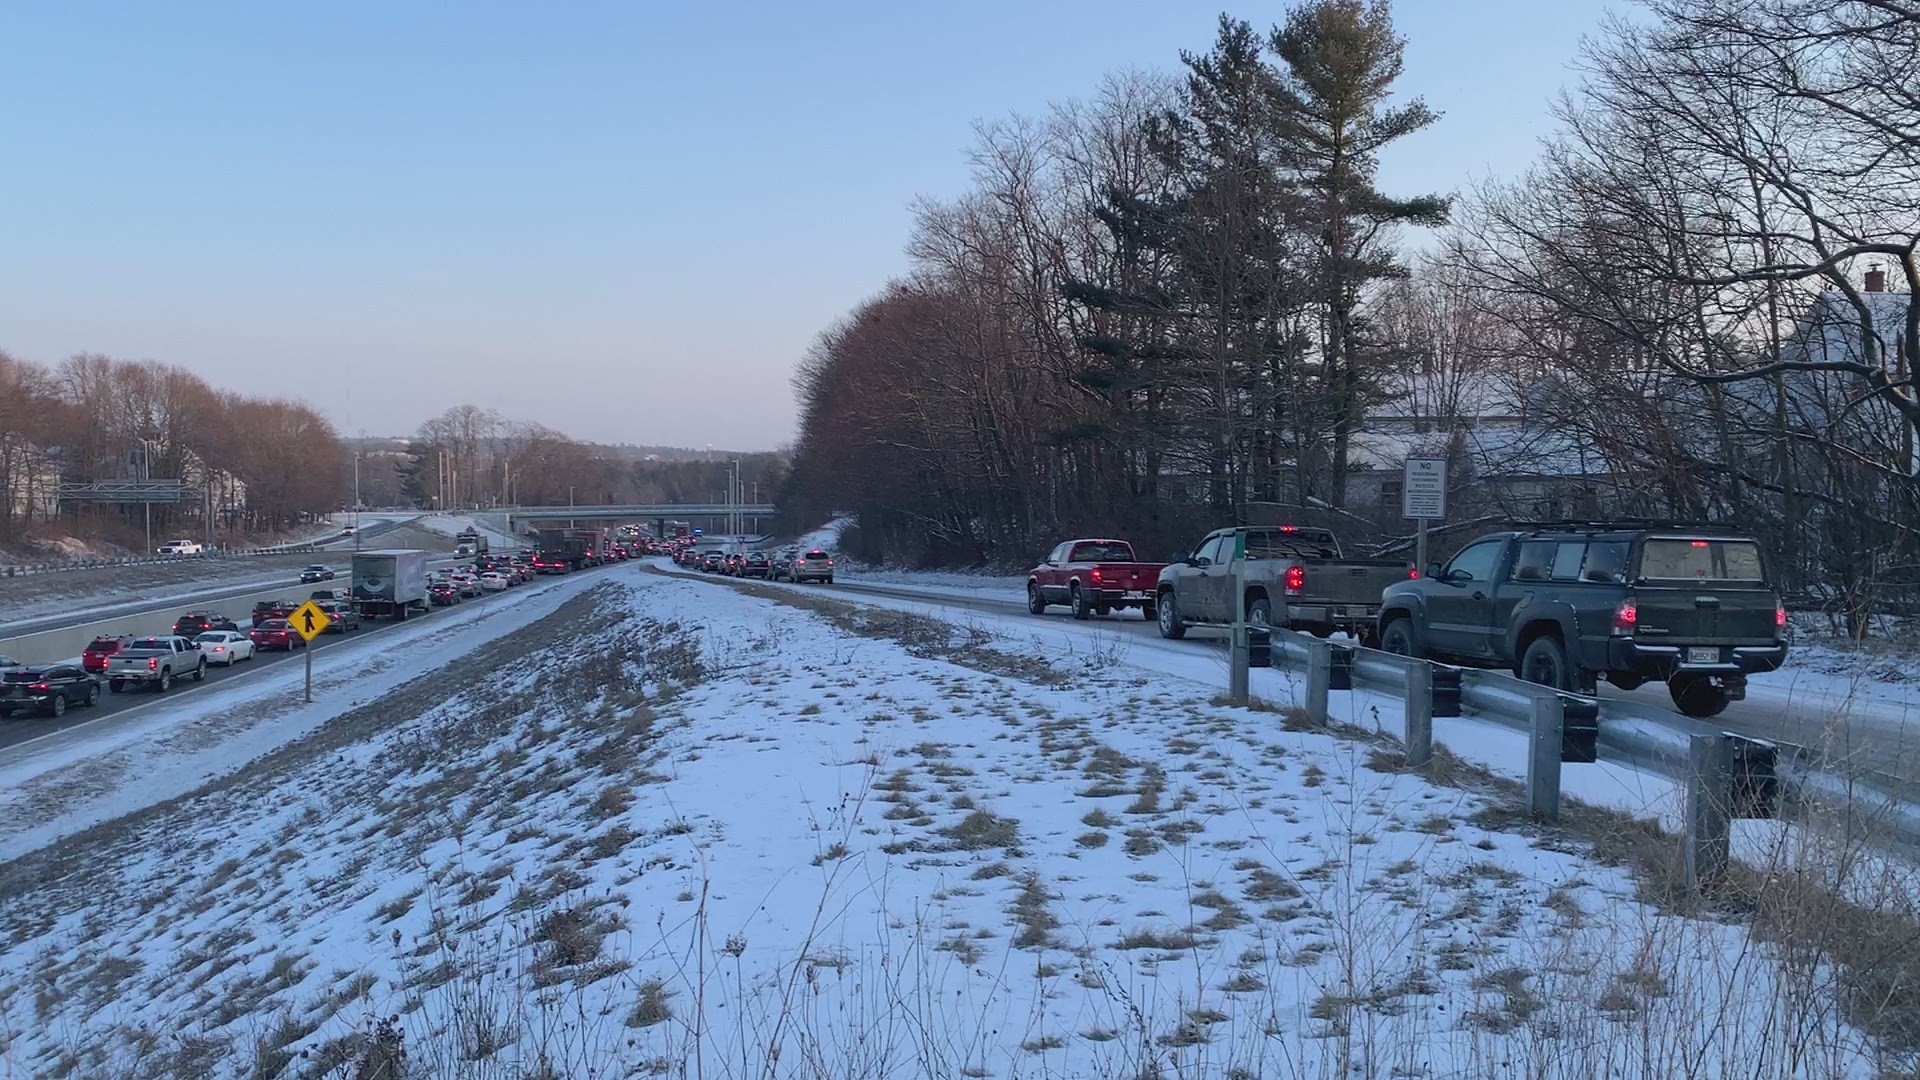 A crash caused delays on the northbound side of I-95 in Brewer (mile marker 185) Friday morning.